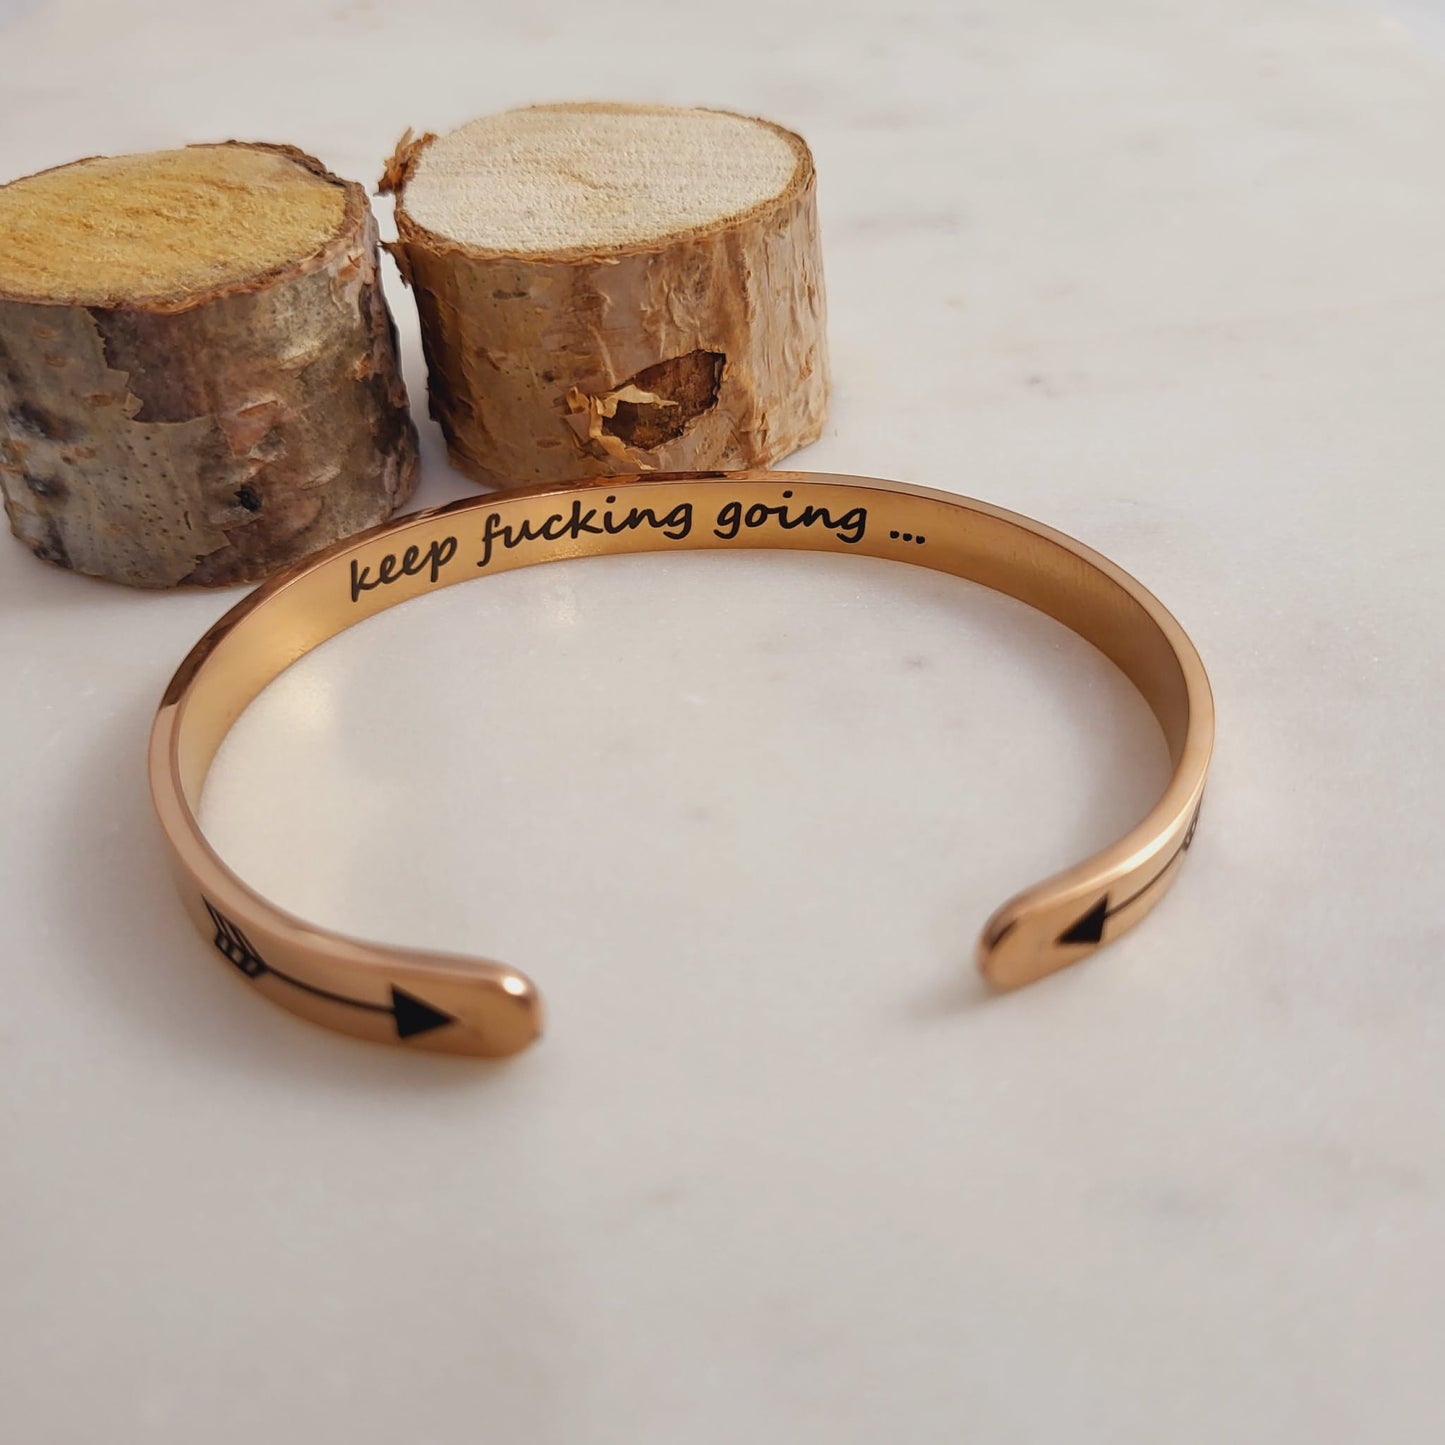 Keep Fucking going Inspirational Bracelet Cuff Bangle Mantra Quote Inscribed.